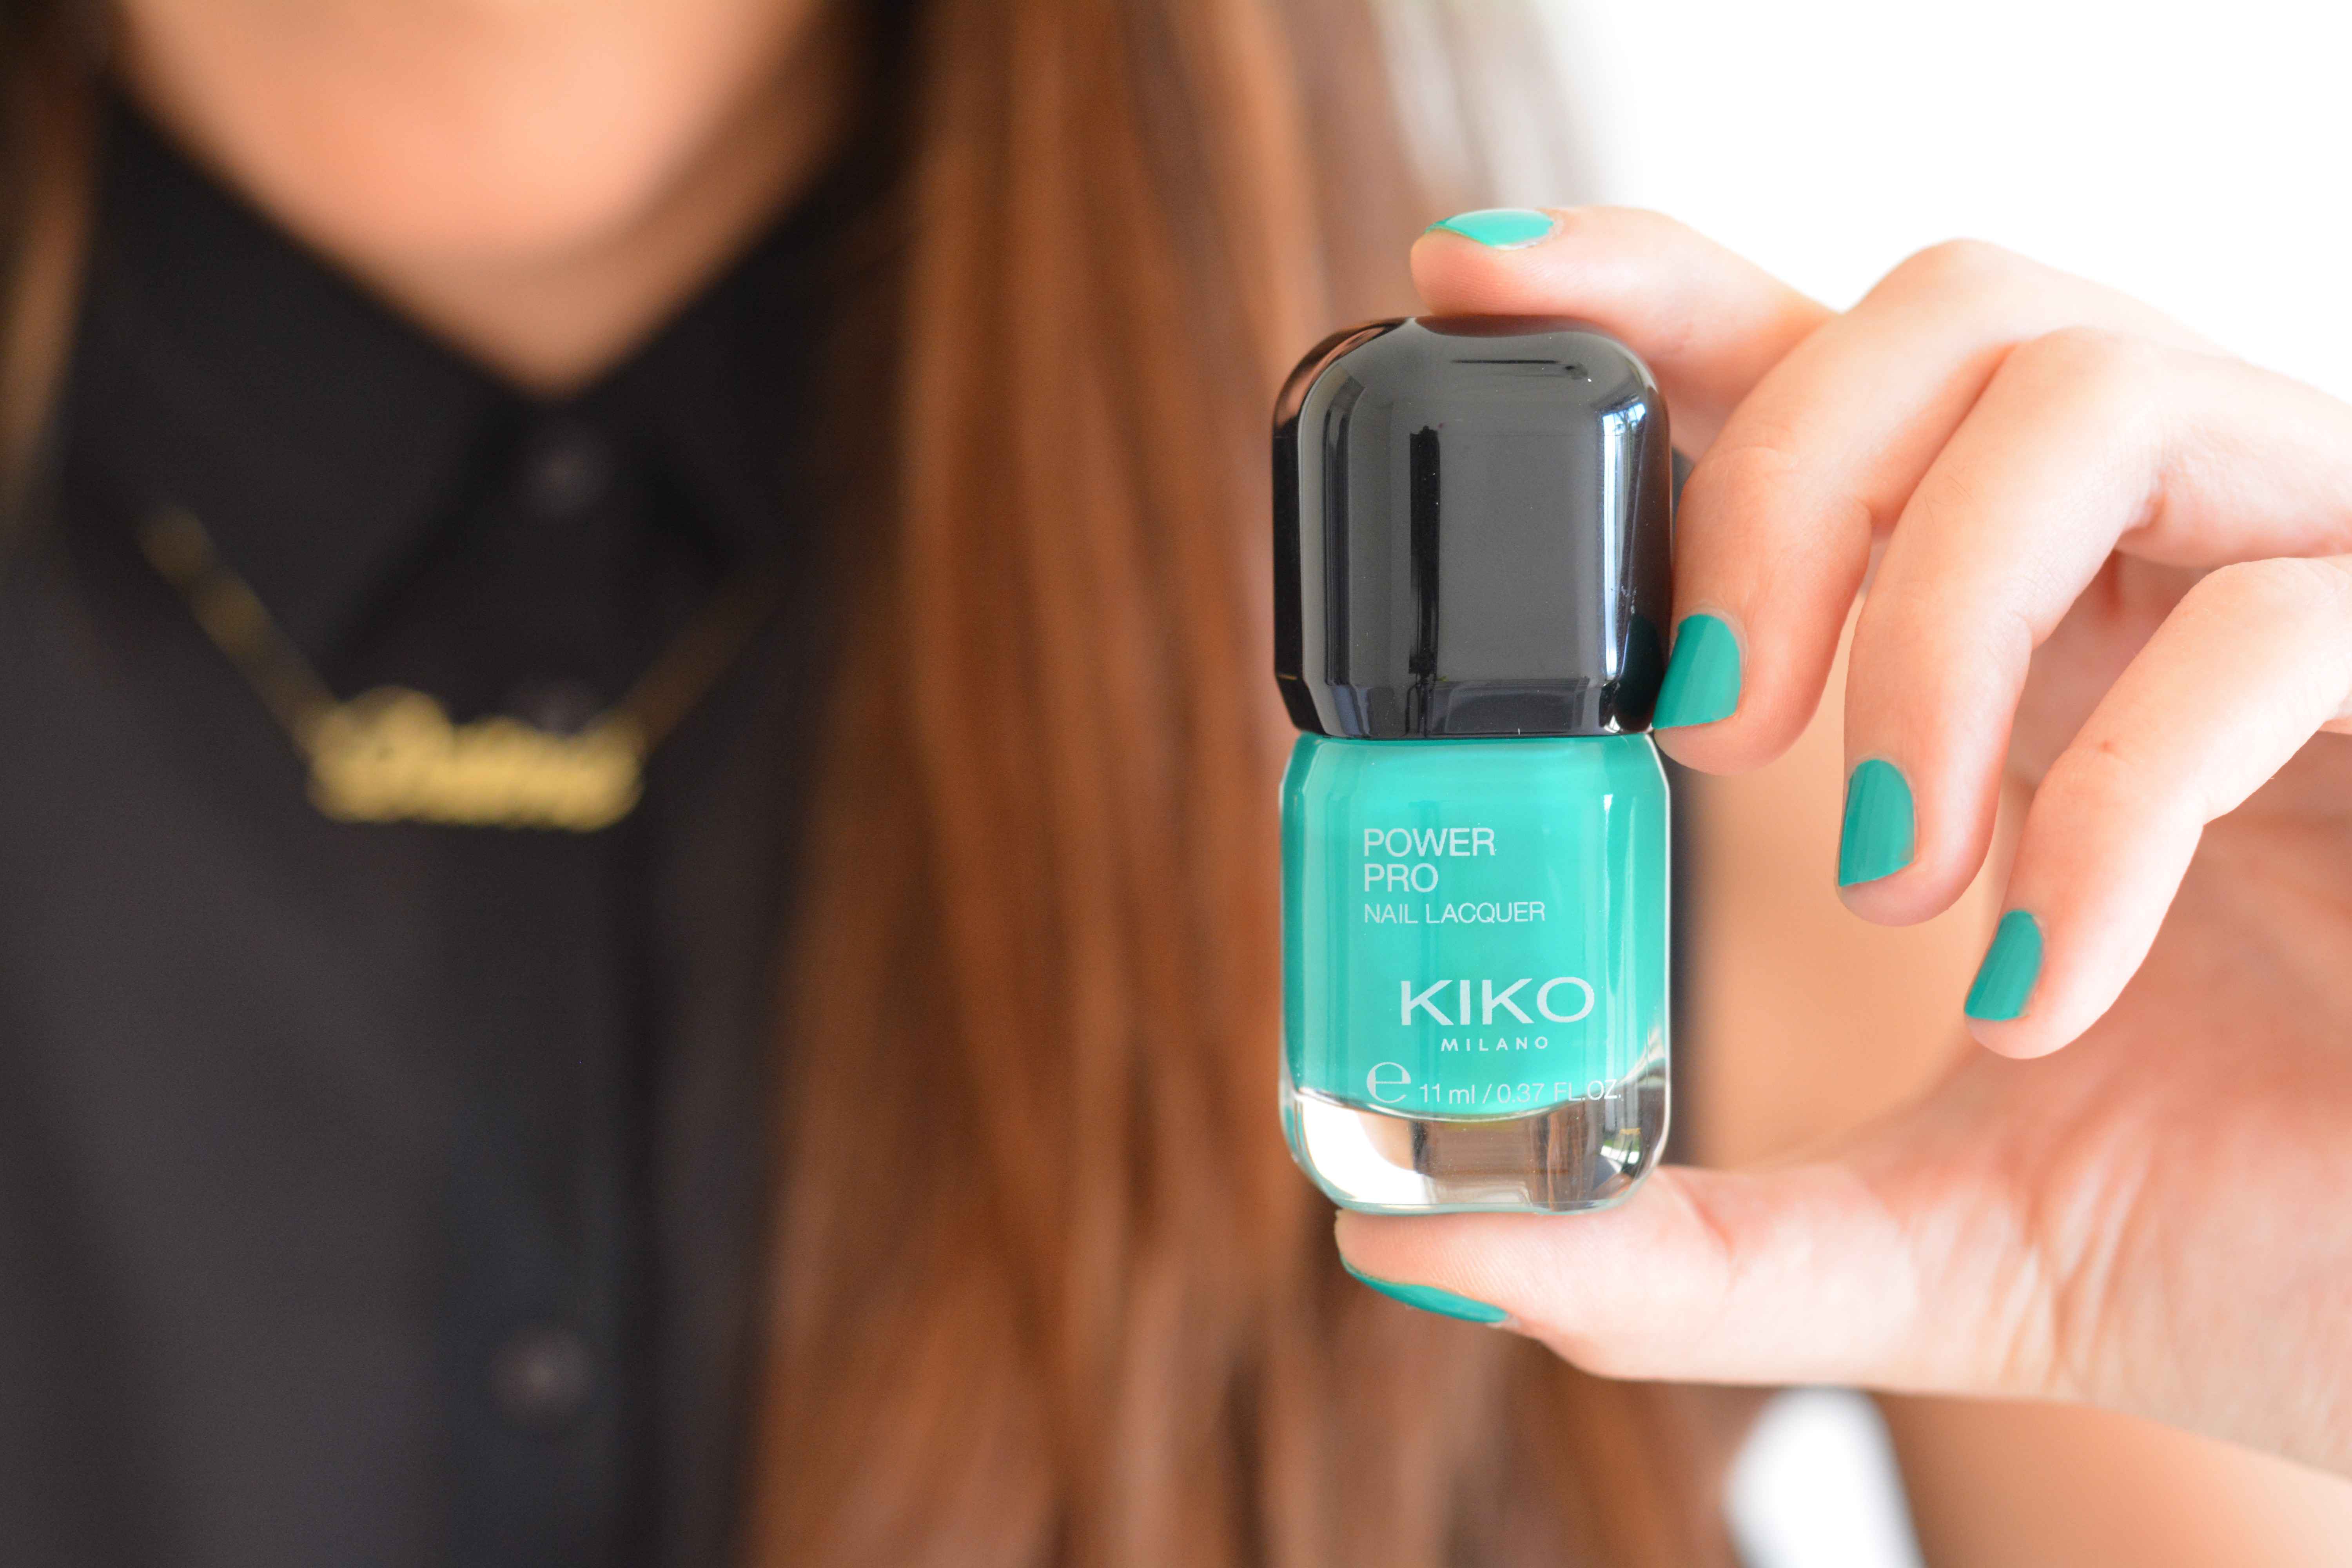 kiko-power-pro-nail-laquer-vernis-ongles-emerald-swatch-